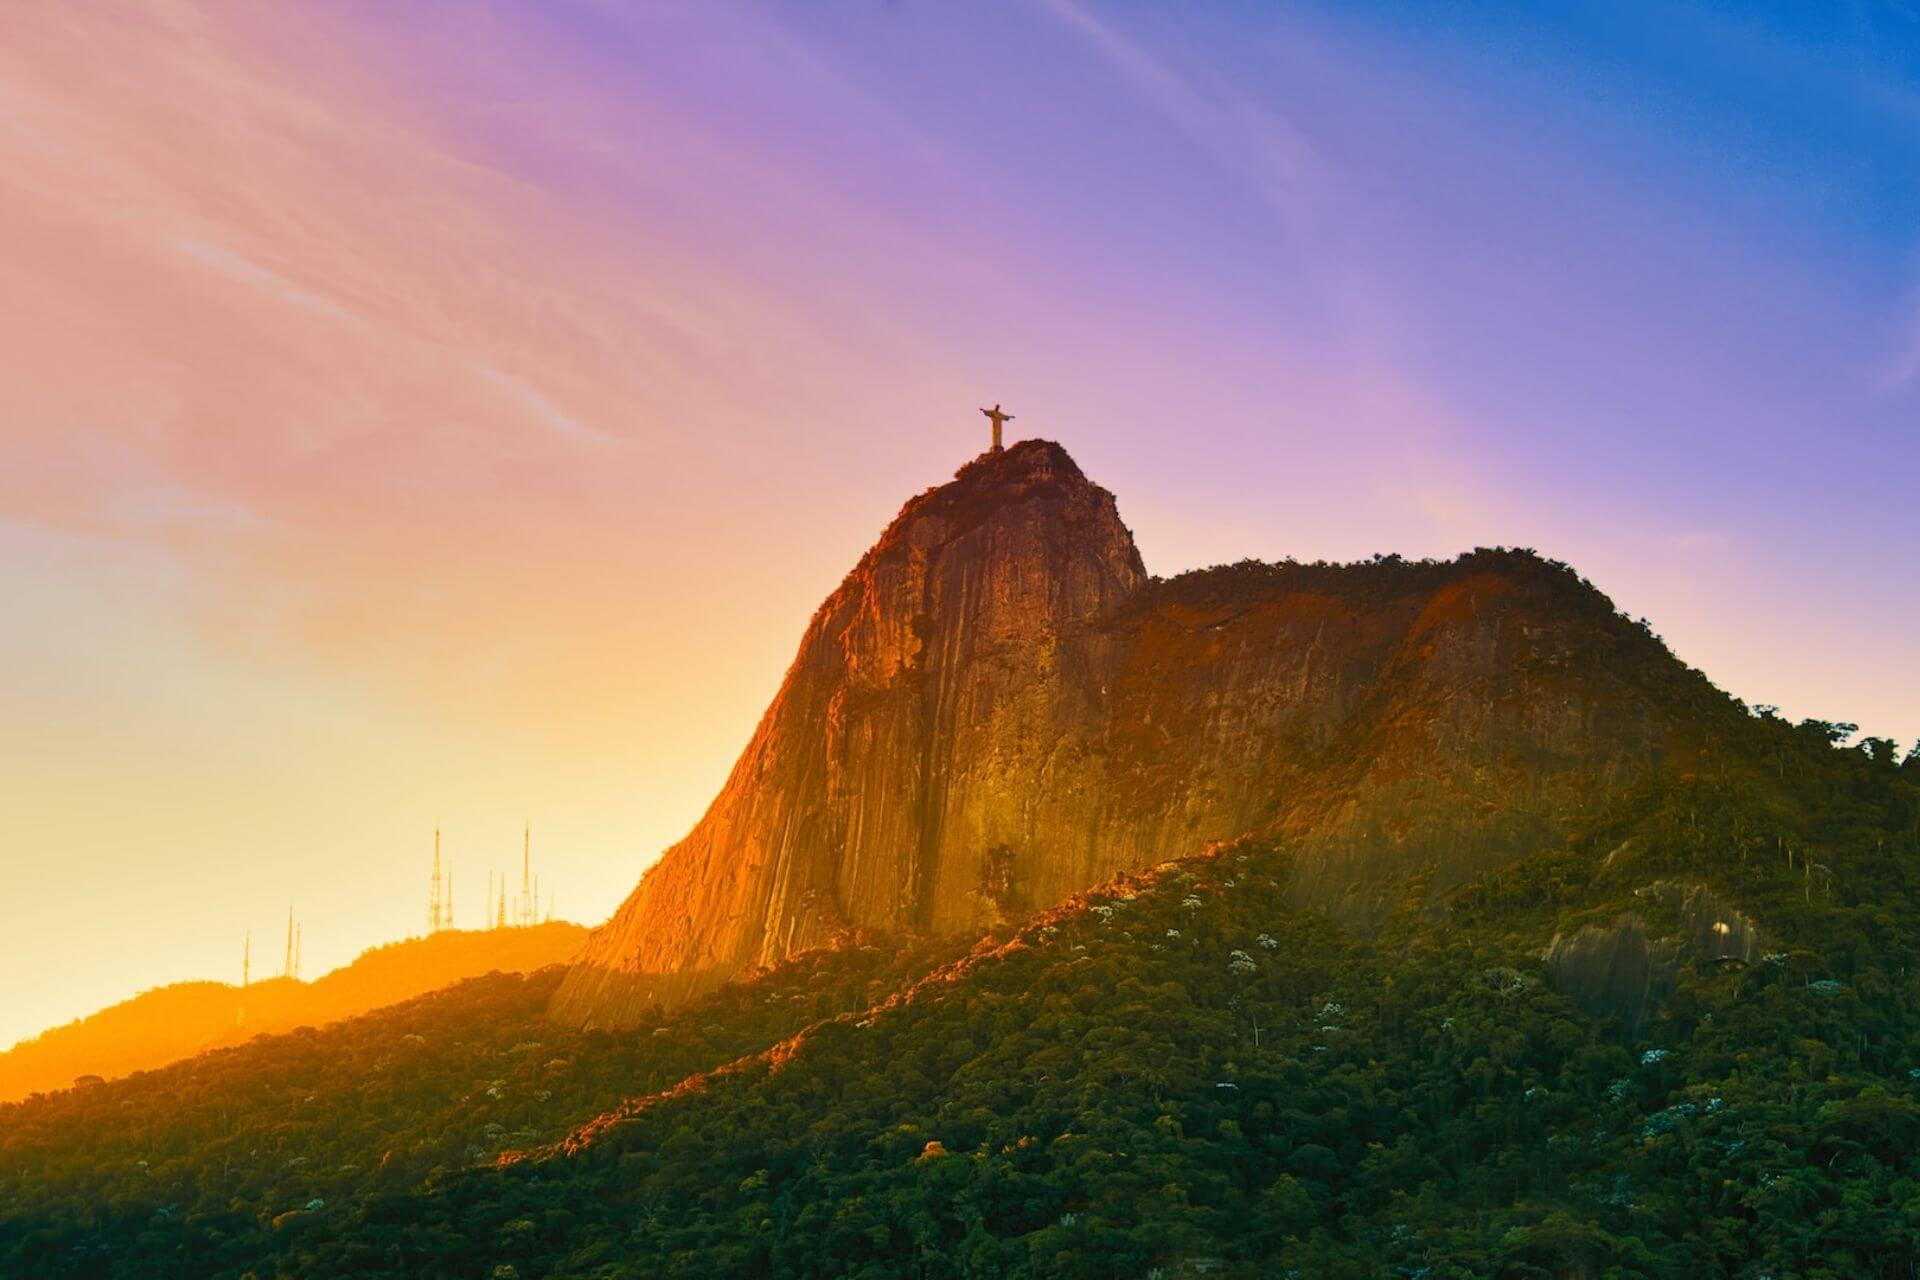 View of the Christ the Saviour statue on top of a mountain in Rio de Janeiro